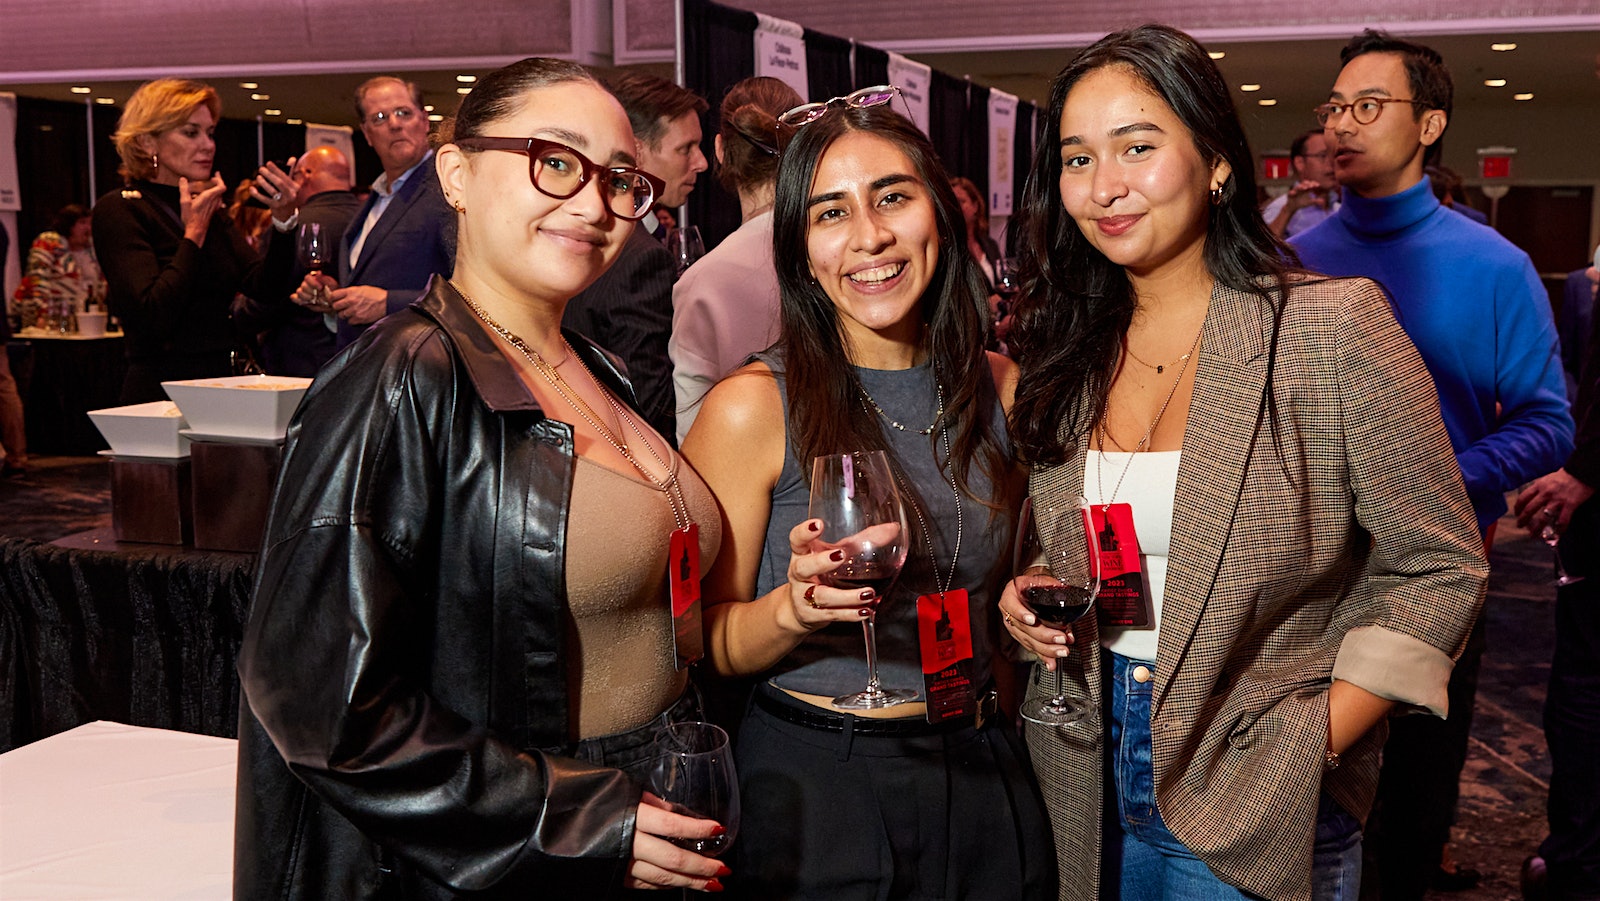  Three women in their 20s attending the Wine Spectator Grand Tasting together